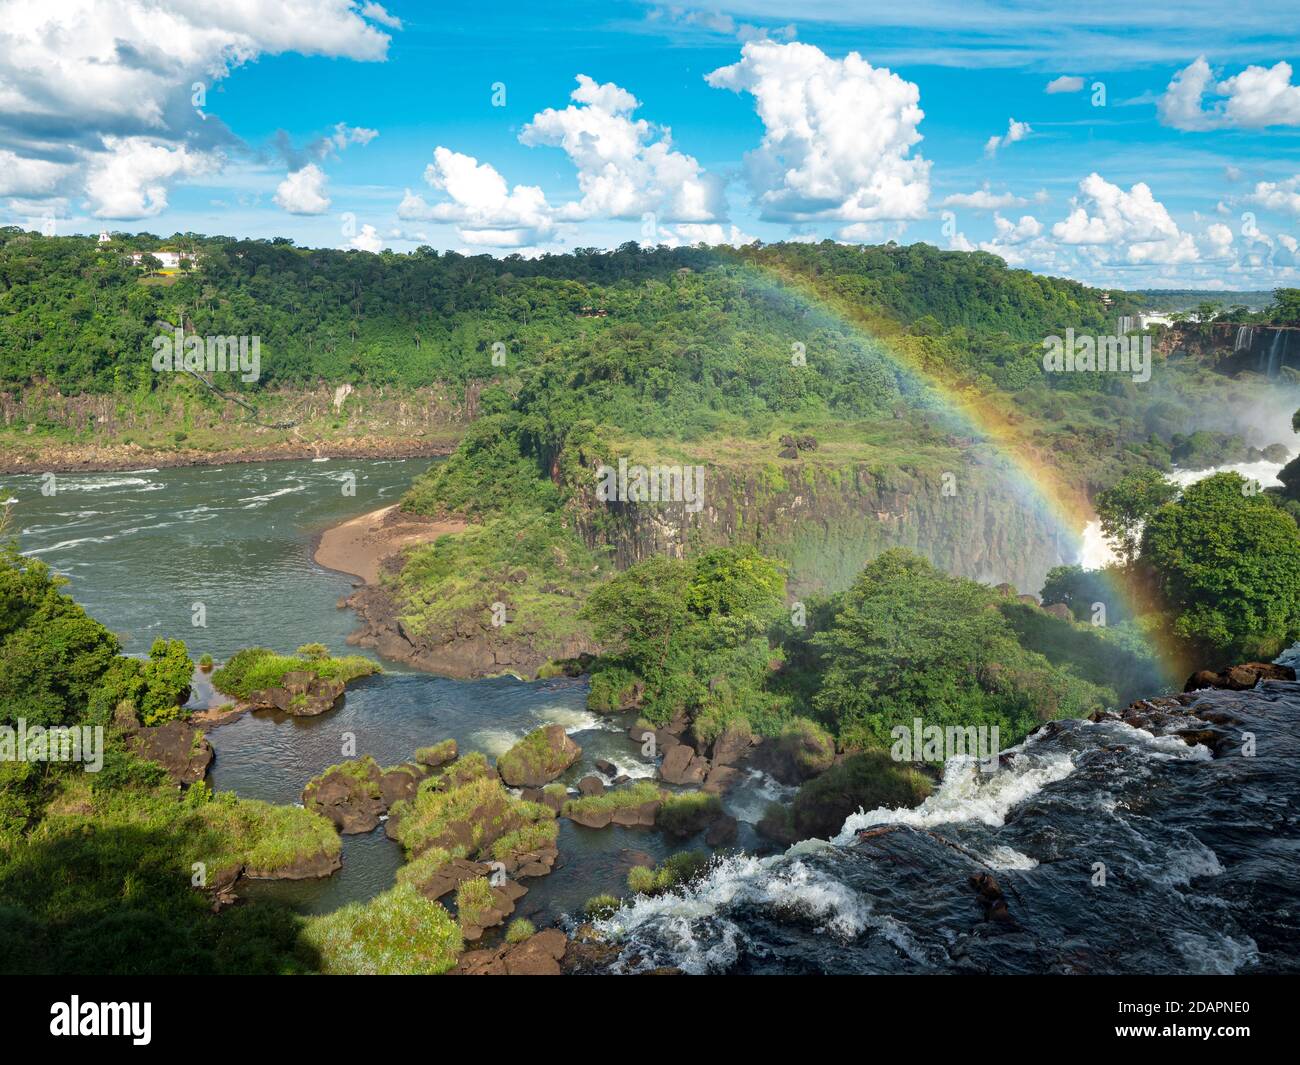 View of Iguazú Falls taken from the upper circuit boardwalk, Misiones Province, Argentina. Stock Photo